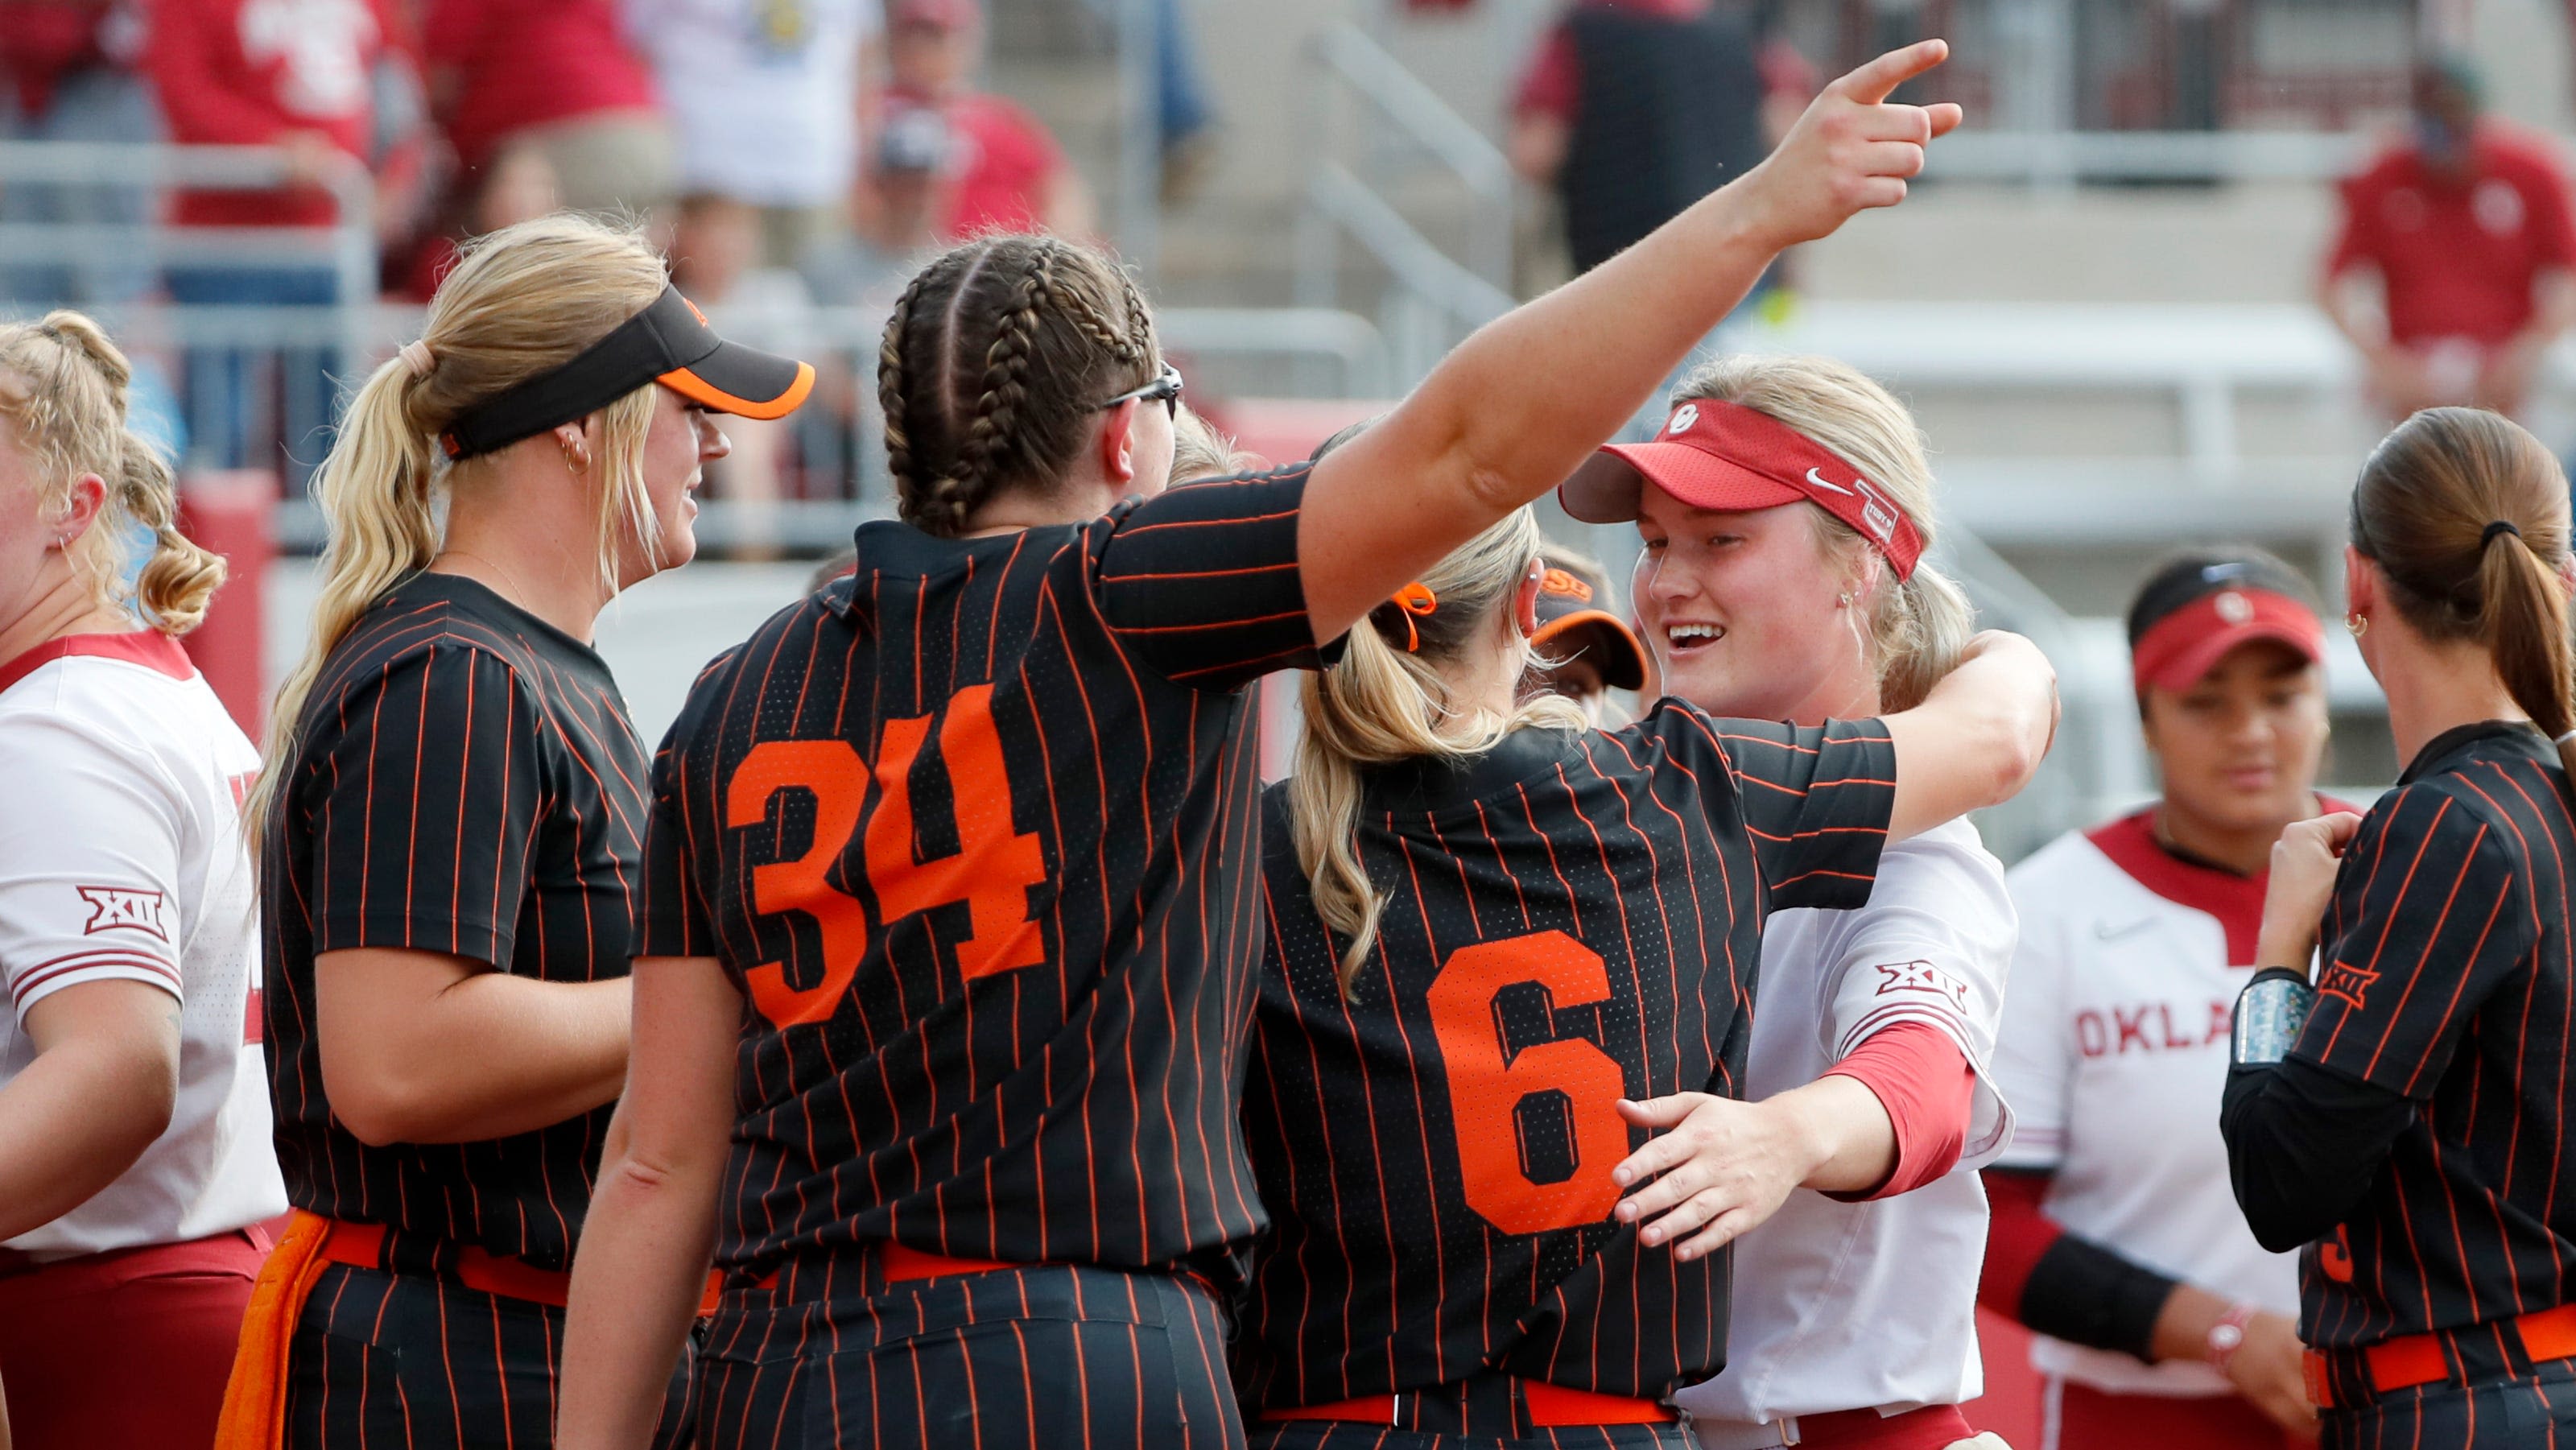 Why did Kelly Maxwell transfer to Oklahoma? Former OSU pitcher made Bedlam softball switch